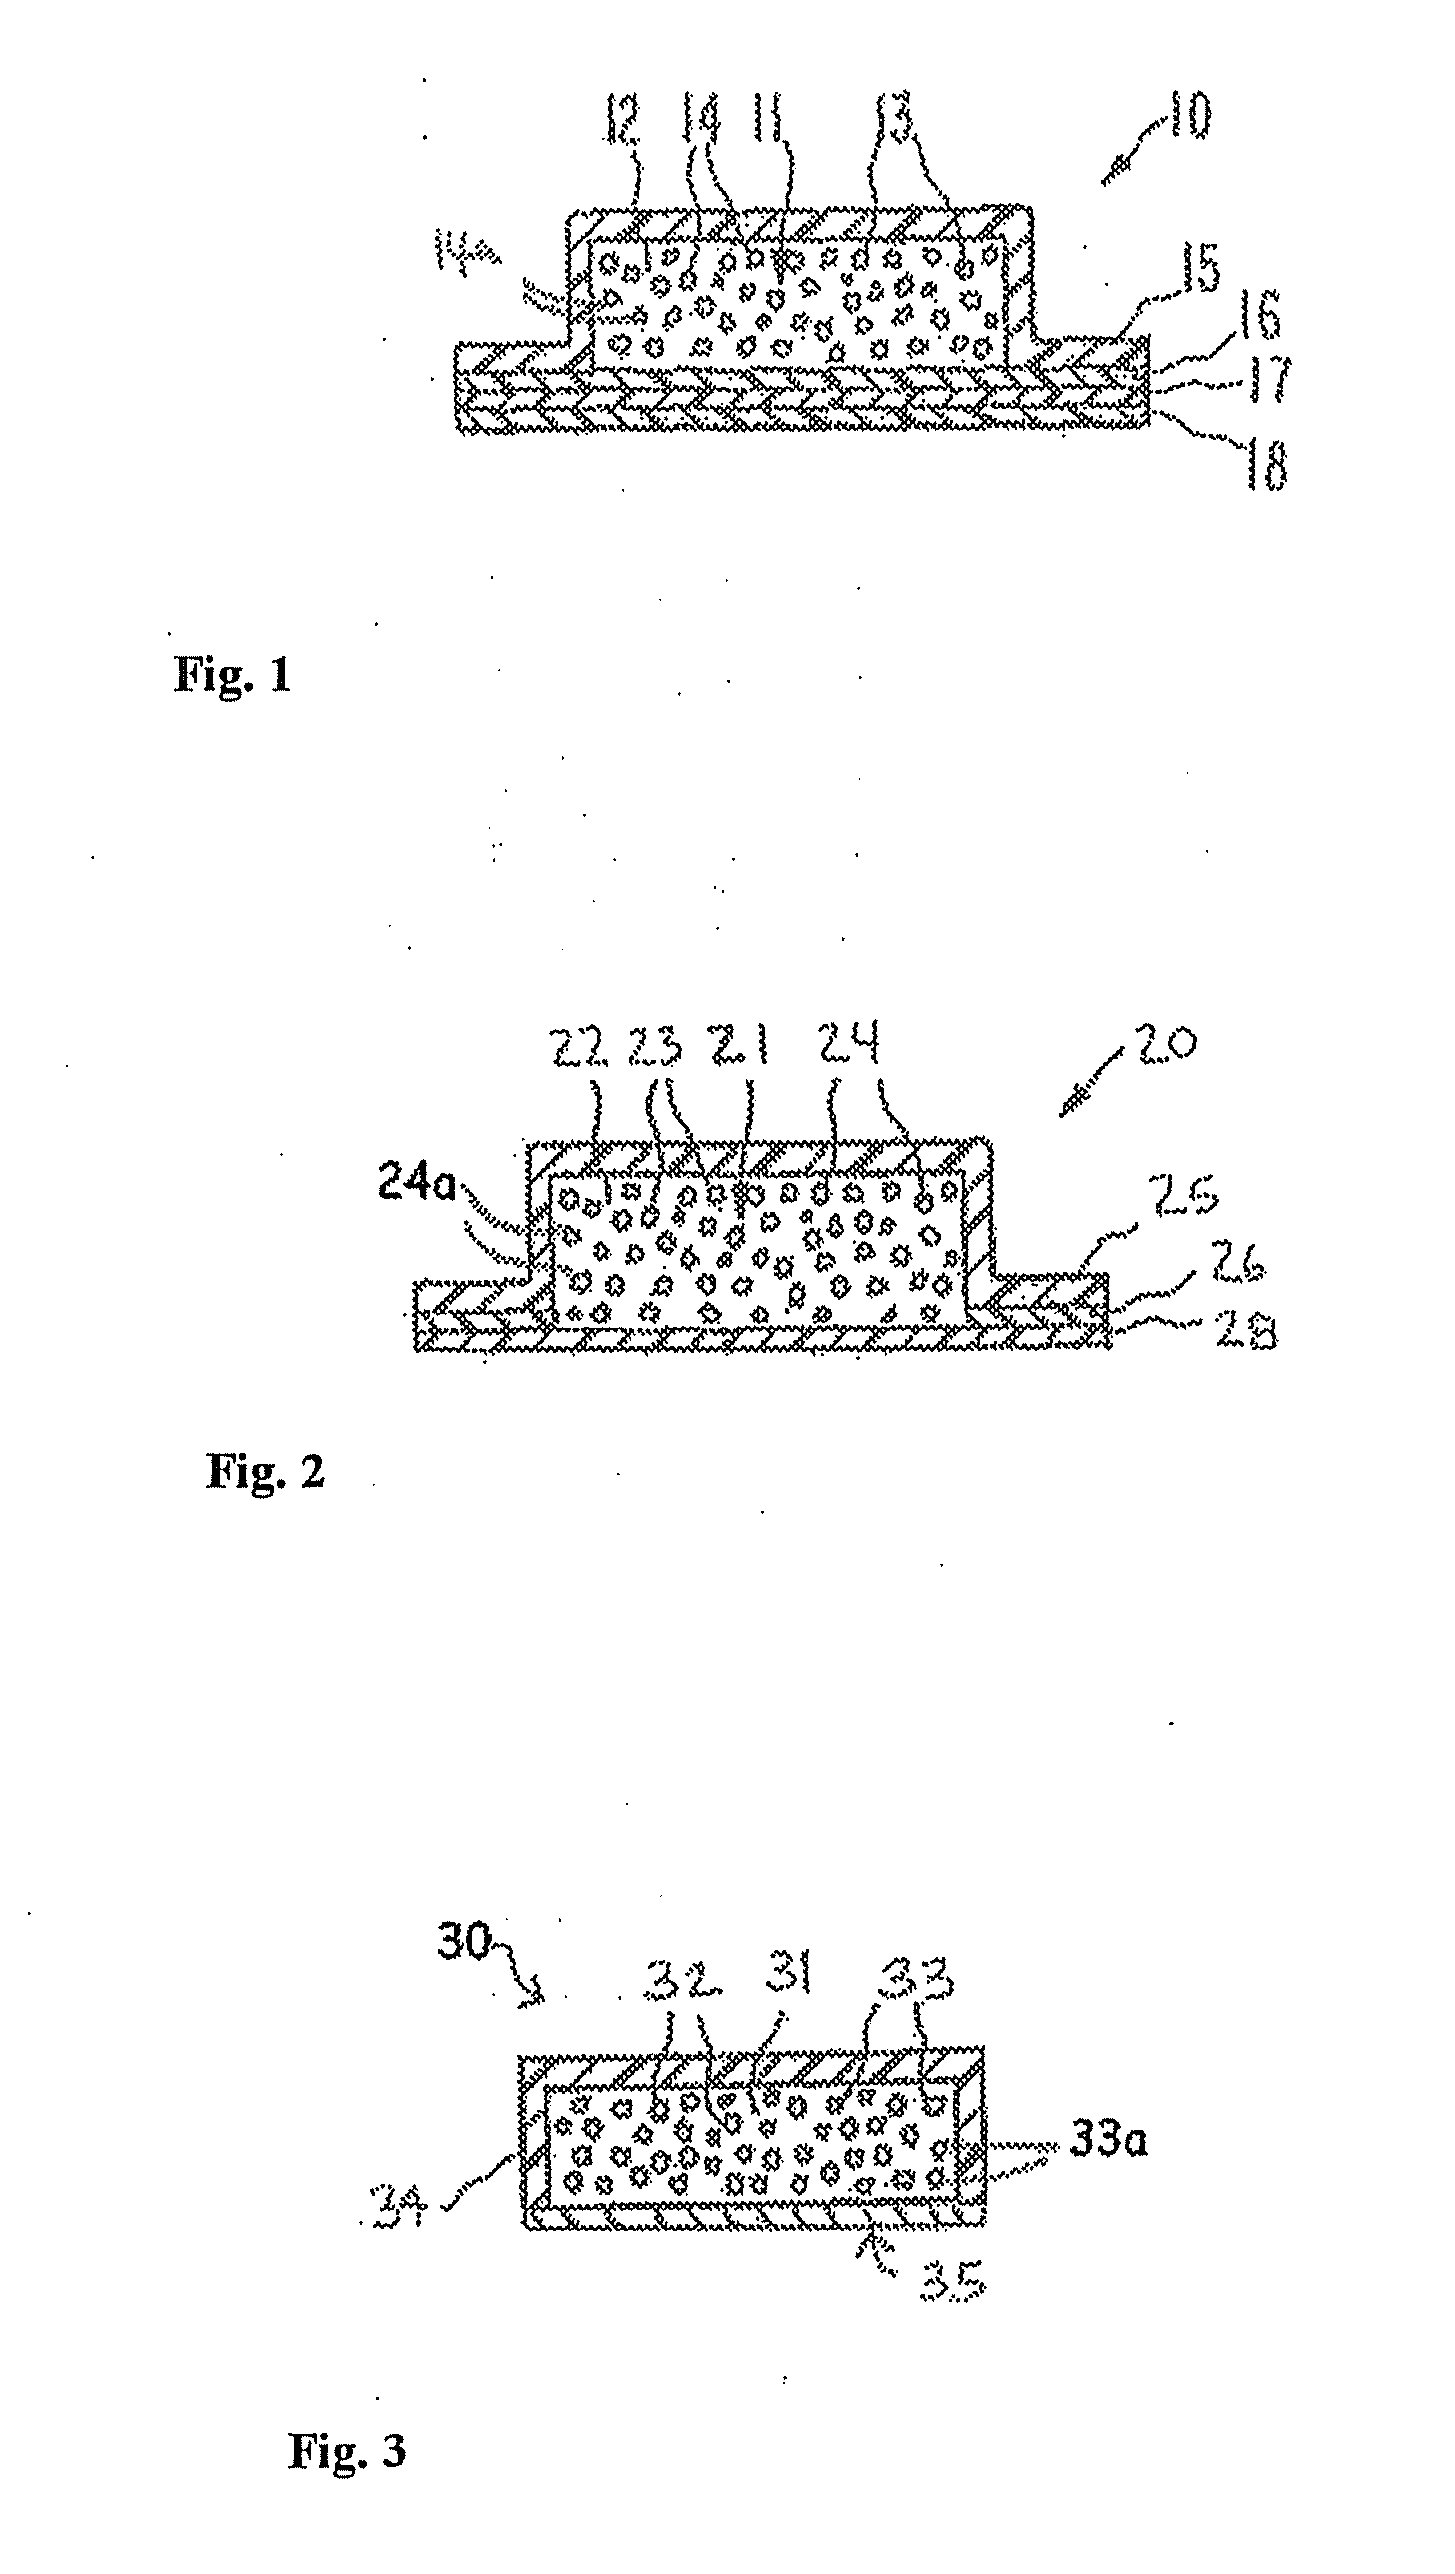 Transdermal dosage form comprising an active agent and a salt and a free-base form of an adverse agent